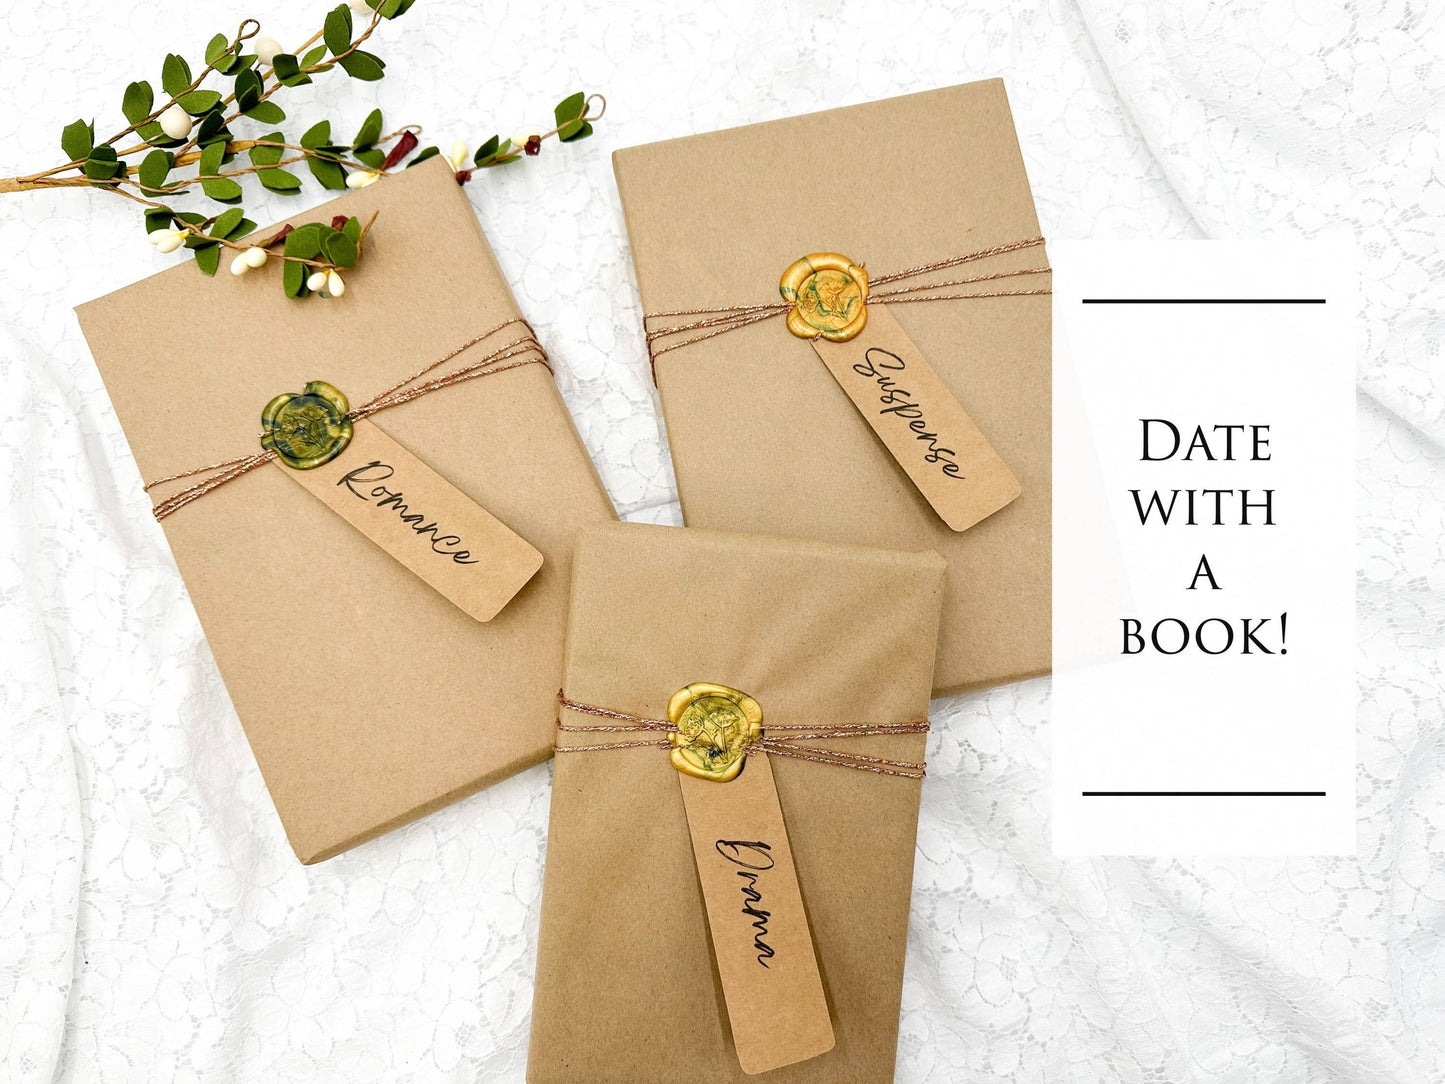 A House of Books - Surprise Book Blind Date with a Book-Suspense